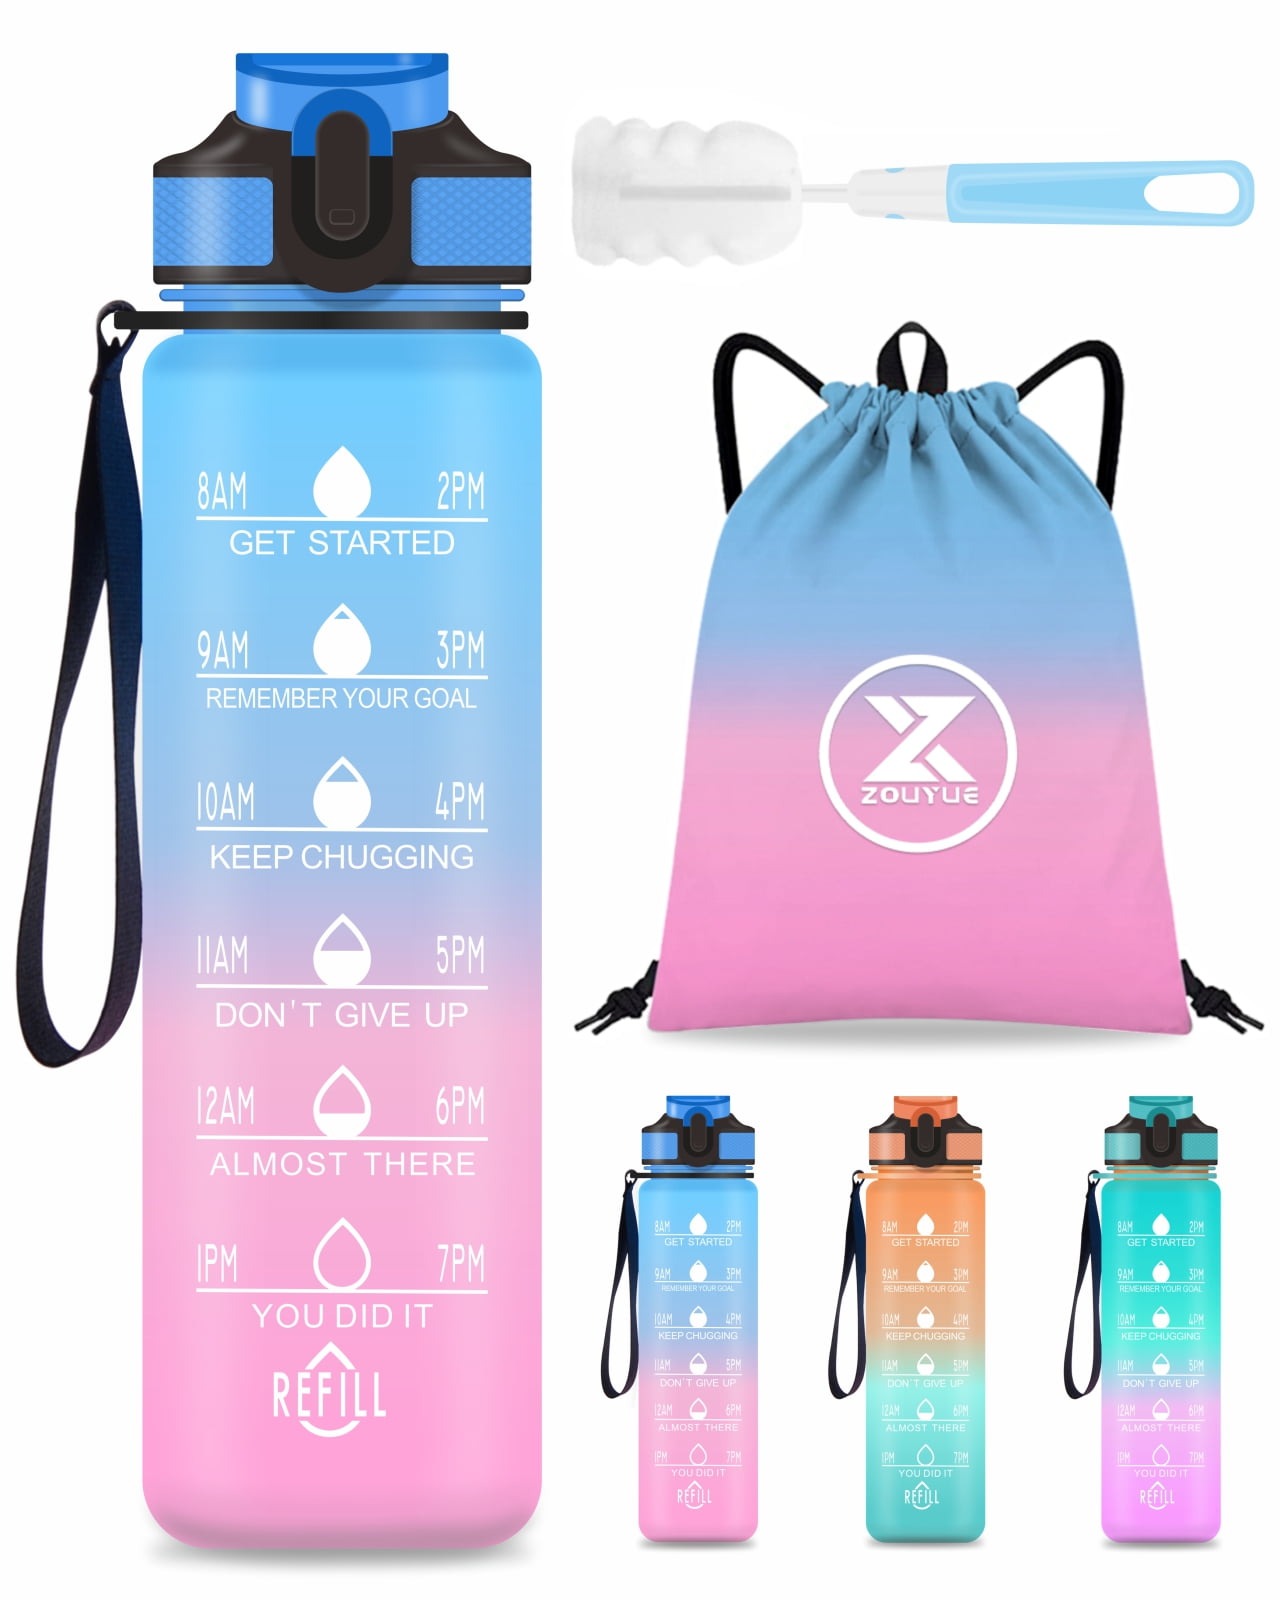 2 PACK: 32 Oz Water Bottle with Time Marker - Motivational Gym Water Bottle  with Strap & Holder for …See more 2 PACK: 32 Oz Water Bottle with Time